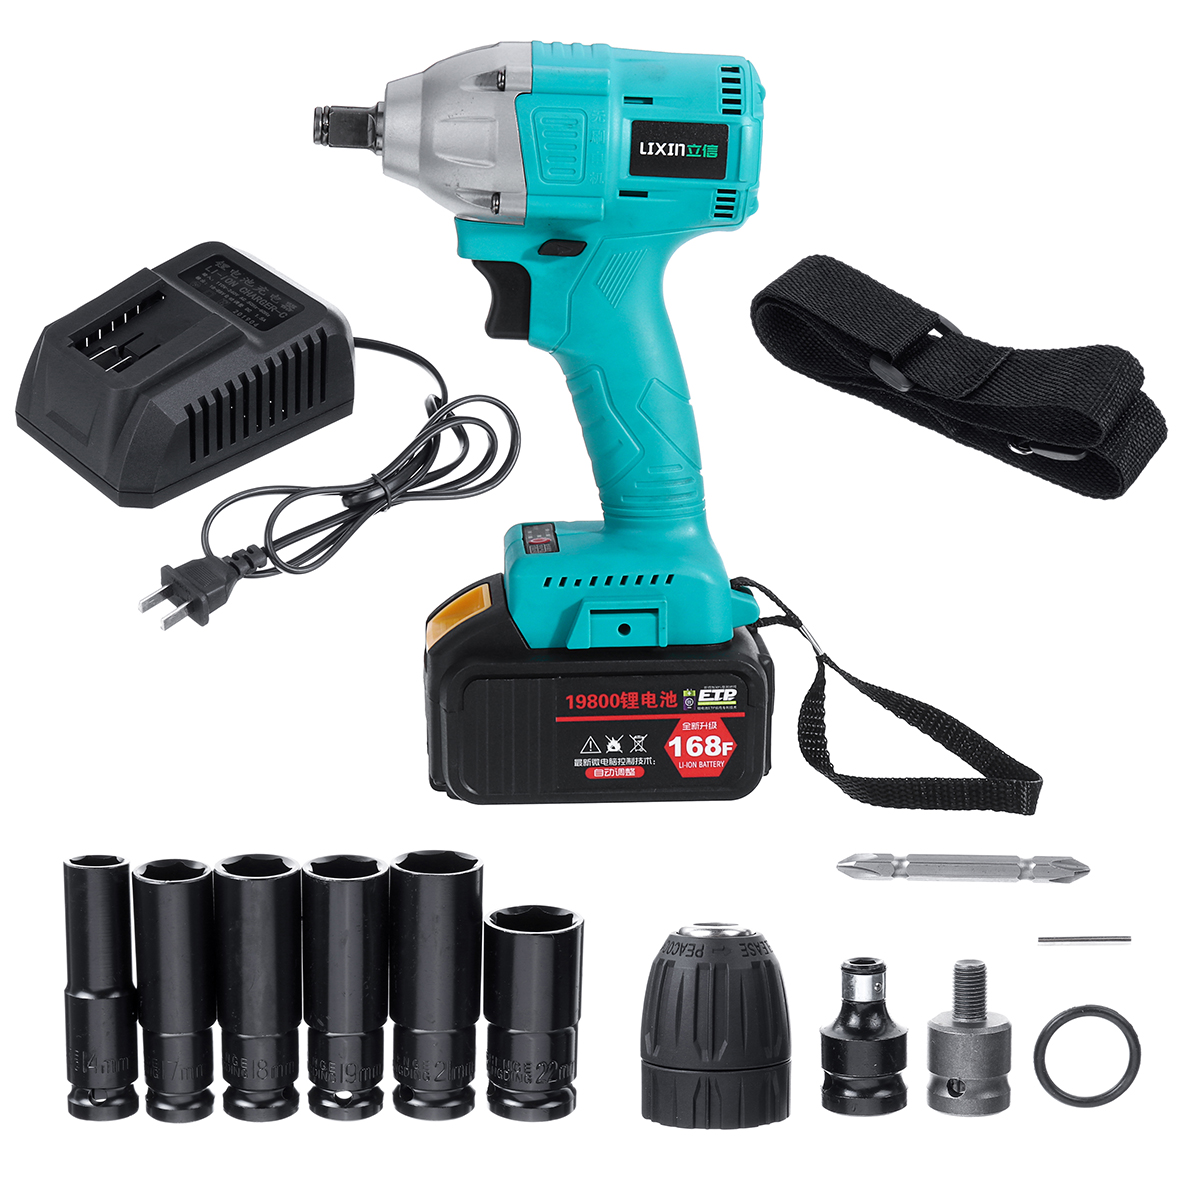 

168F 19800mAh 110V-240V Electric Brushless Impact Wrench LED Lights with Battery Blue